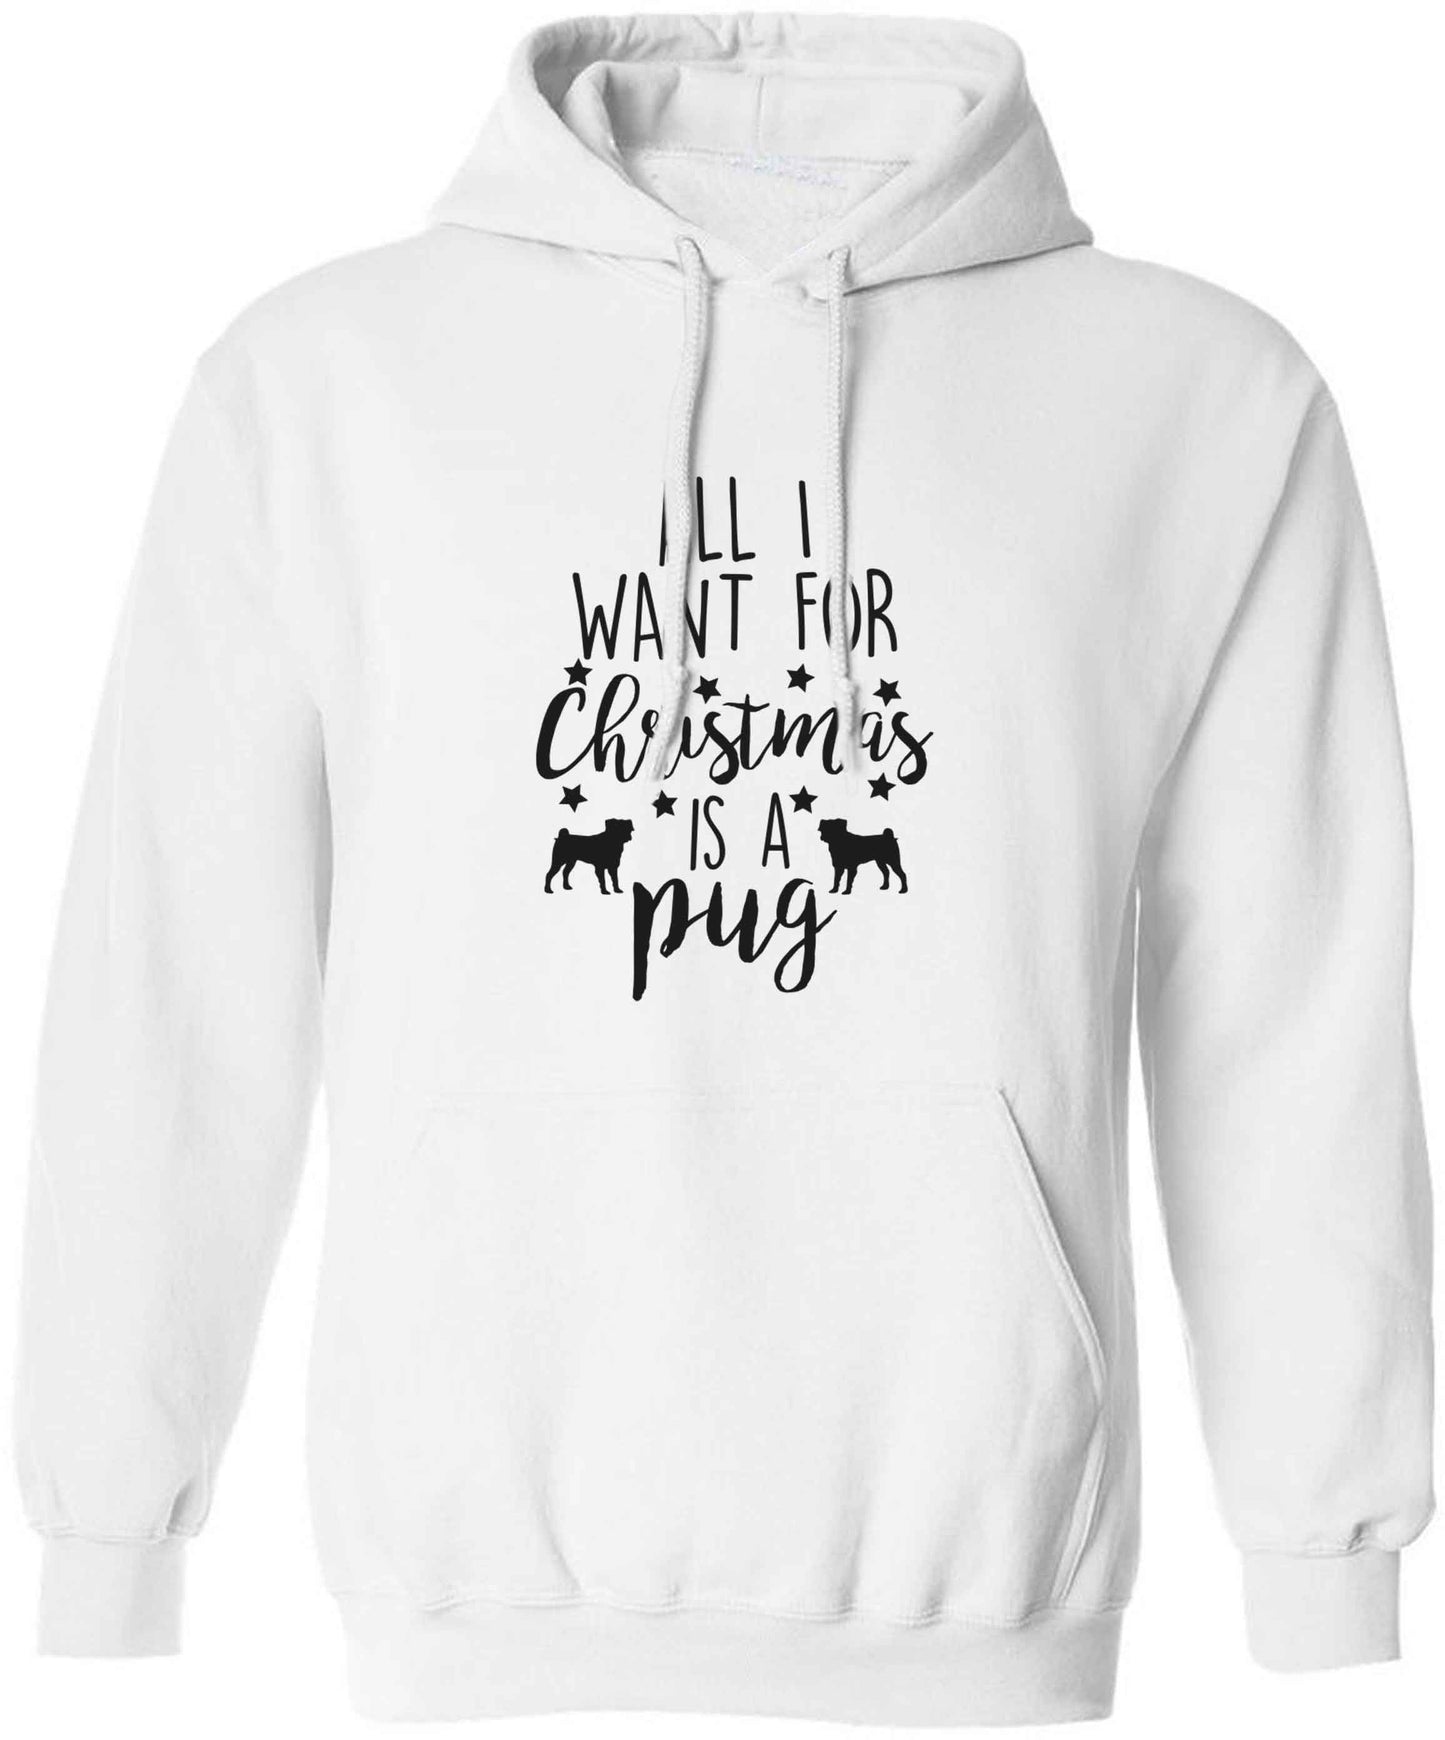 All I want for Christmas is a pug adults unisex white hoodie 2XL